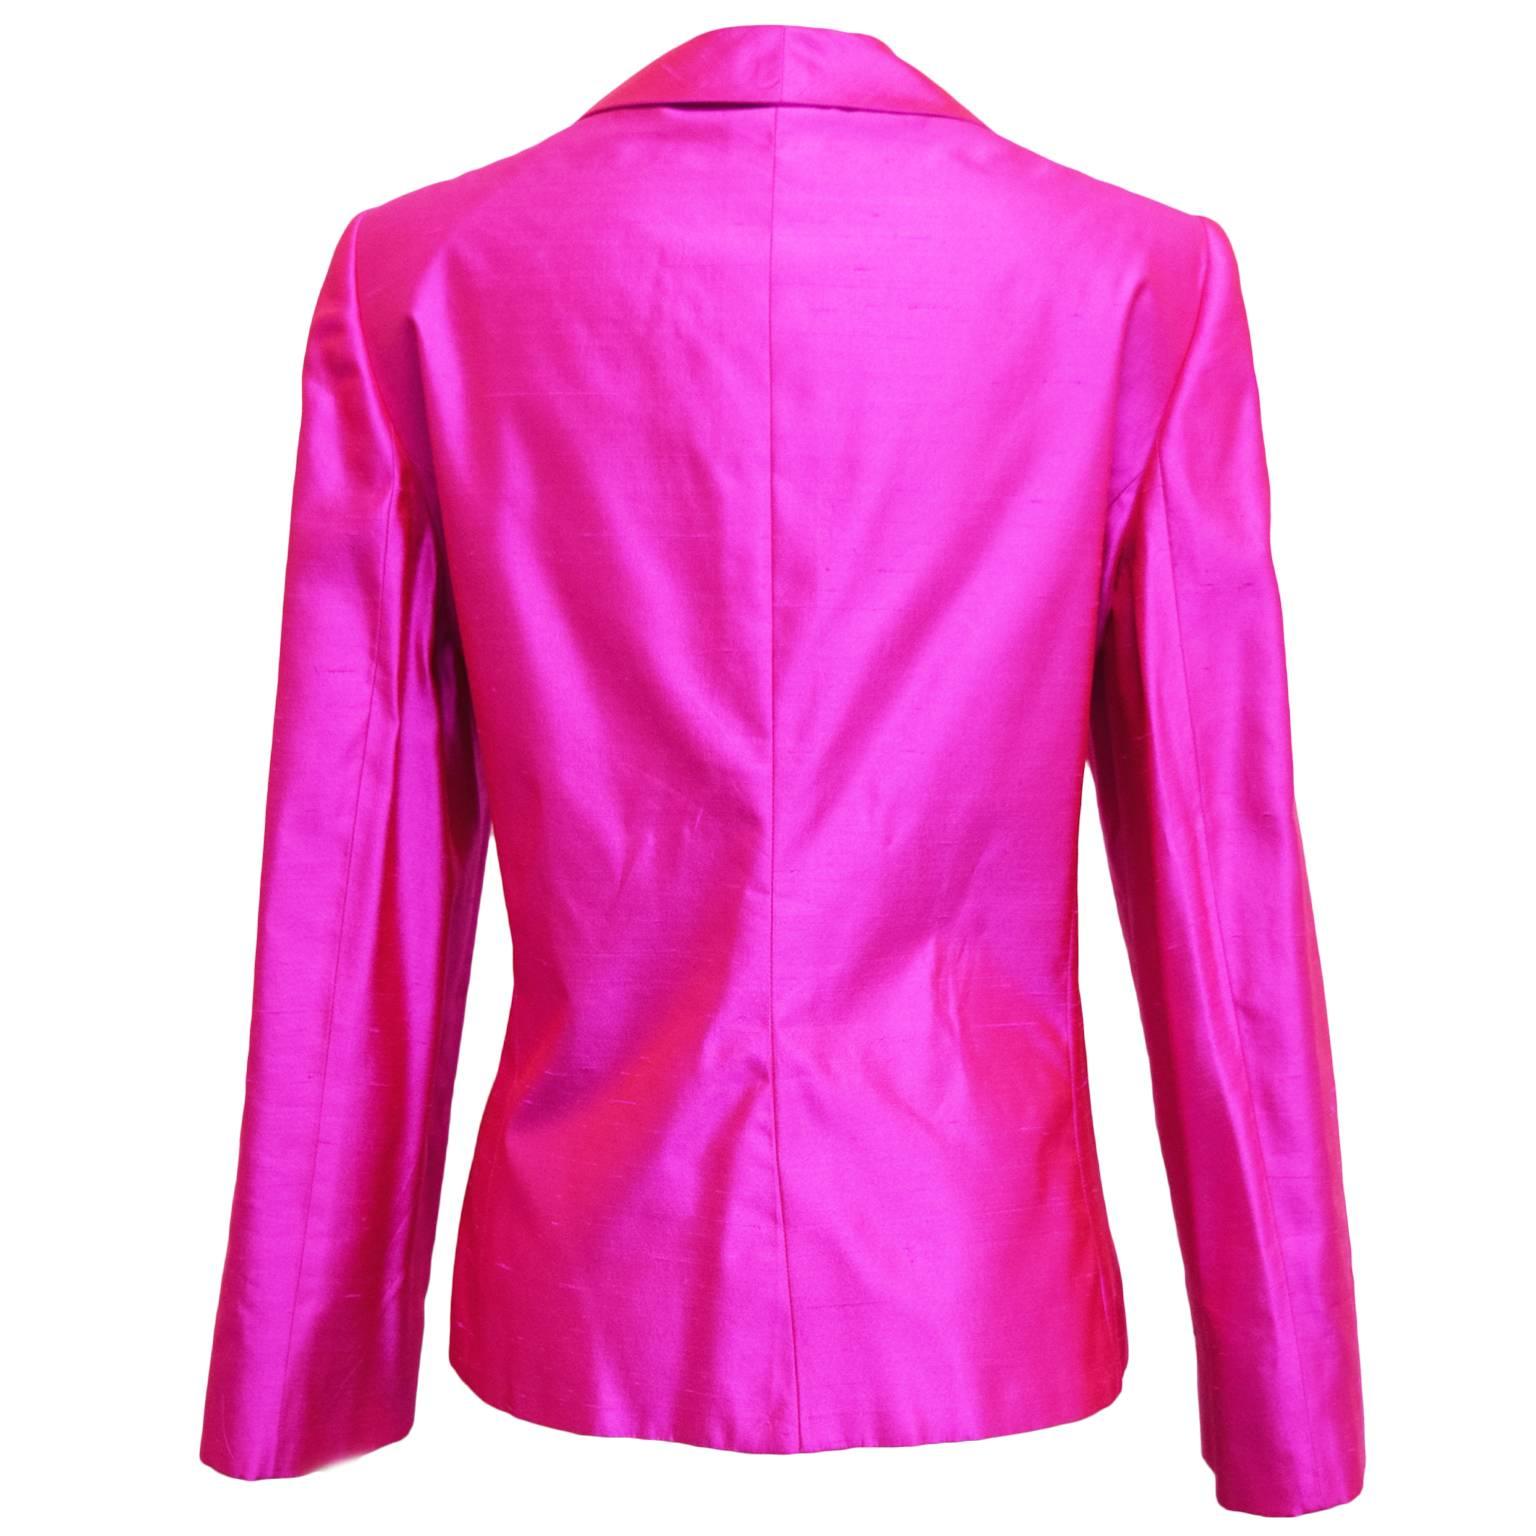 This retro Armani blazer is made from shantung iridescent fuchsia silk, and is single breasted. The gathering around the waist creates structure and shape, has side pockets and is fully lined.